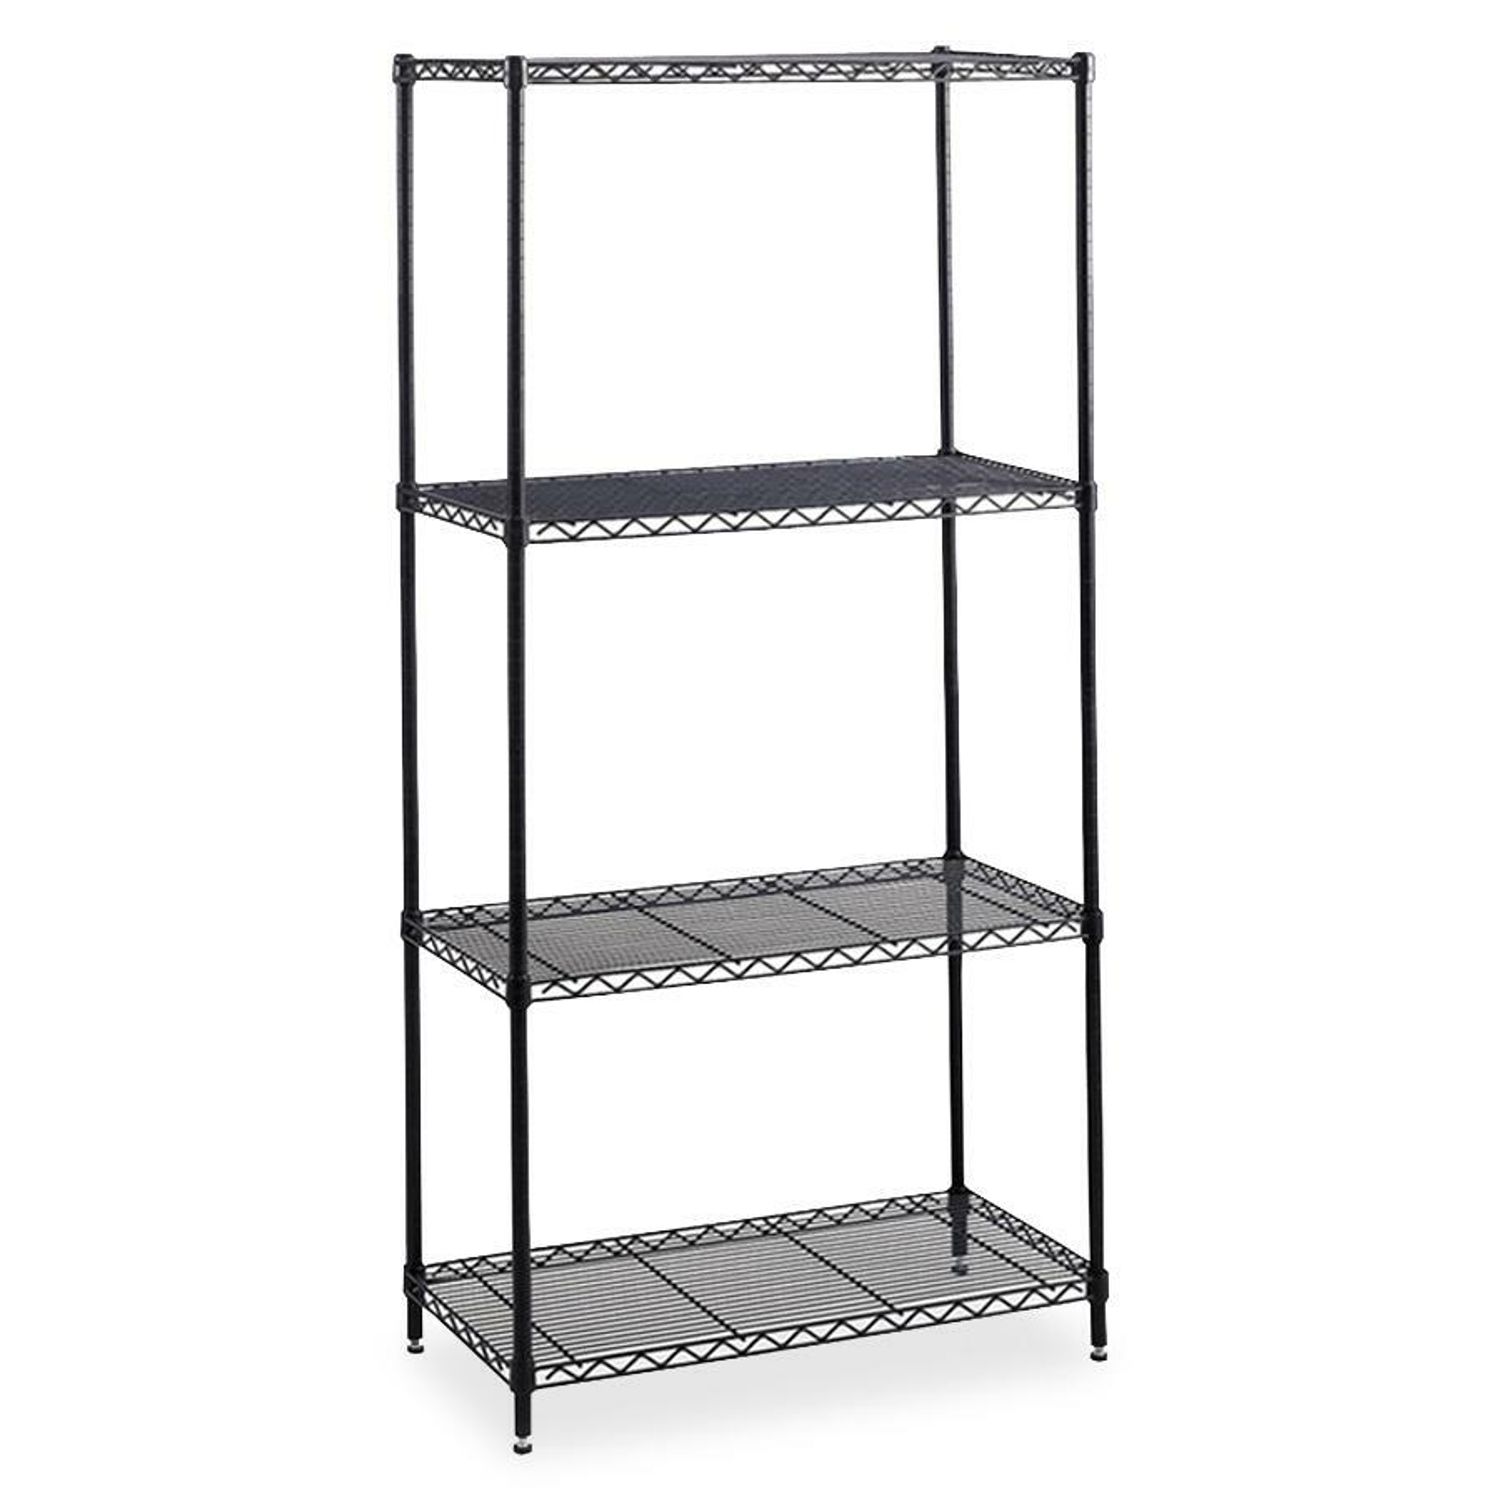 Industrial Wire Shelving 36" x 24", 4 x Shelf(ves), 2500 lb Load Capacity, Leveling Glide, Dust Proof, Adjustable Shelf, Durable, Black, Powder Coated, Steel, Assembly Required